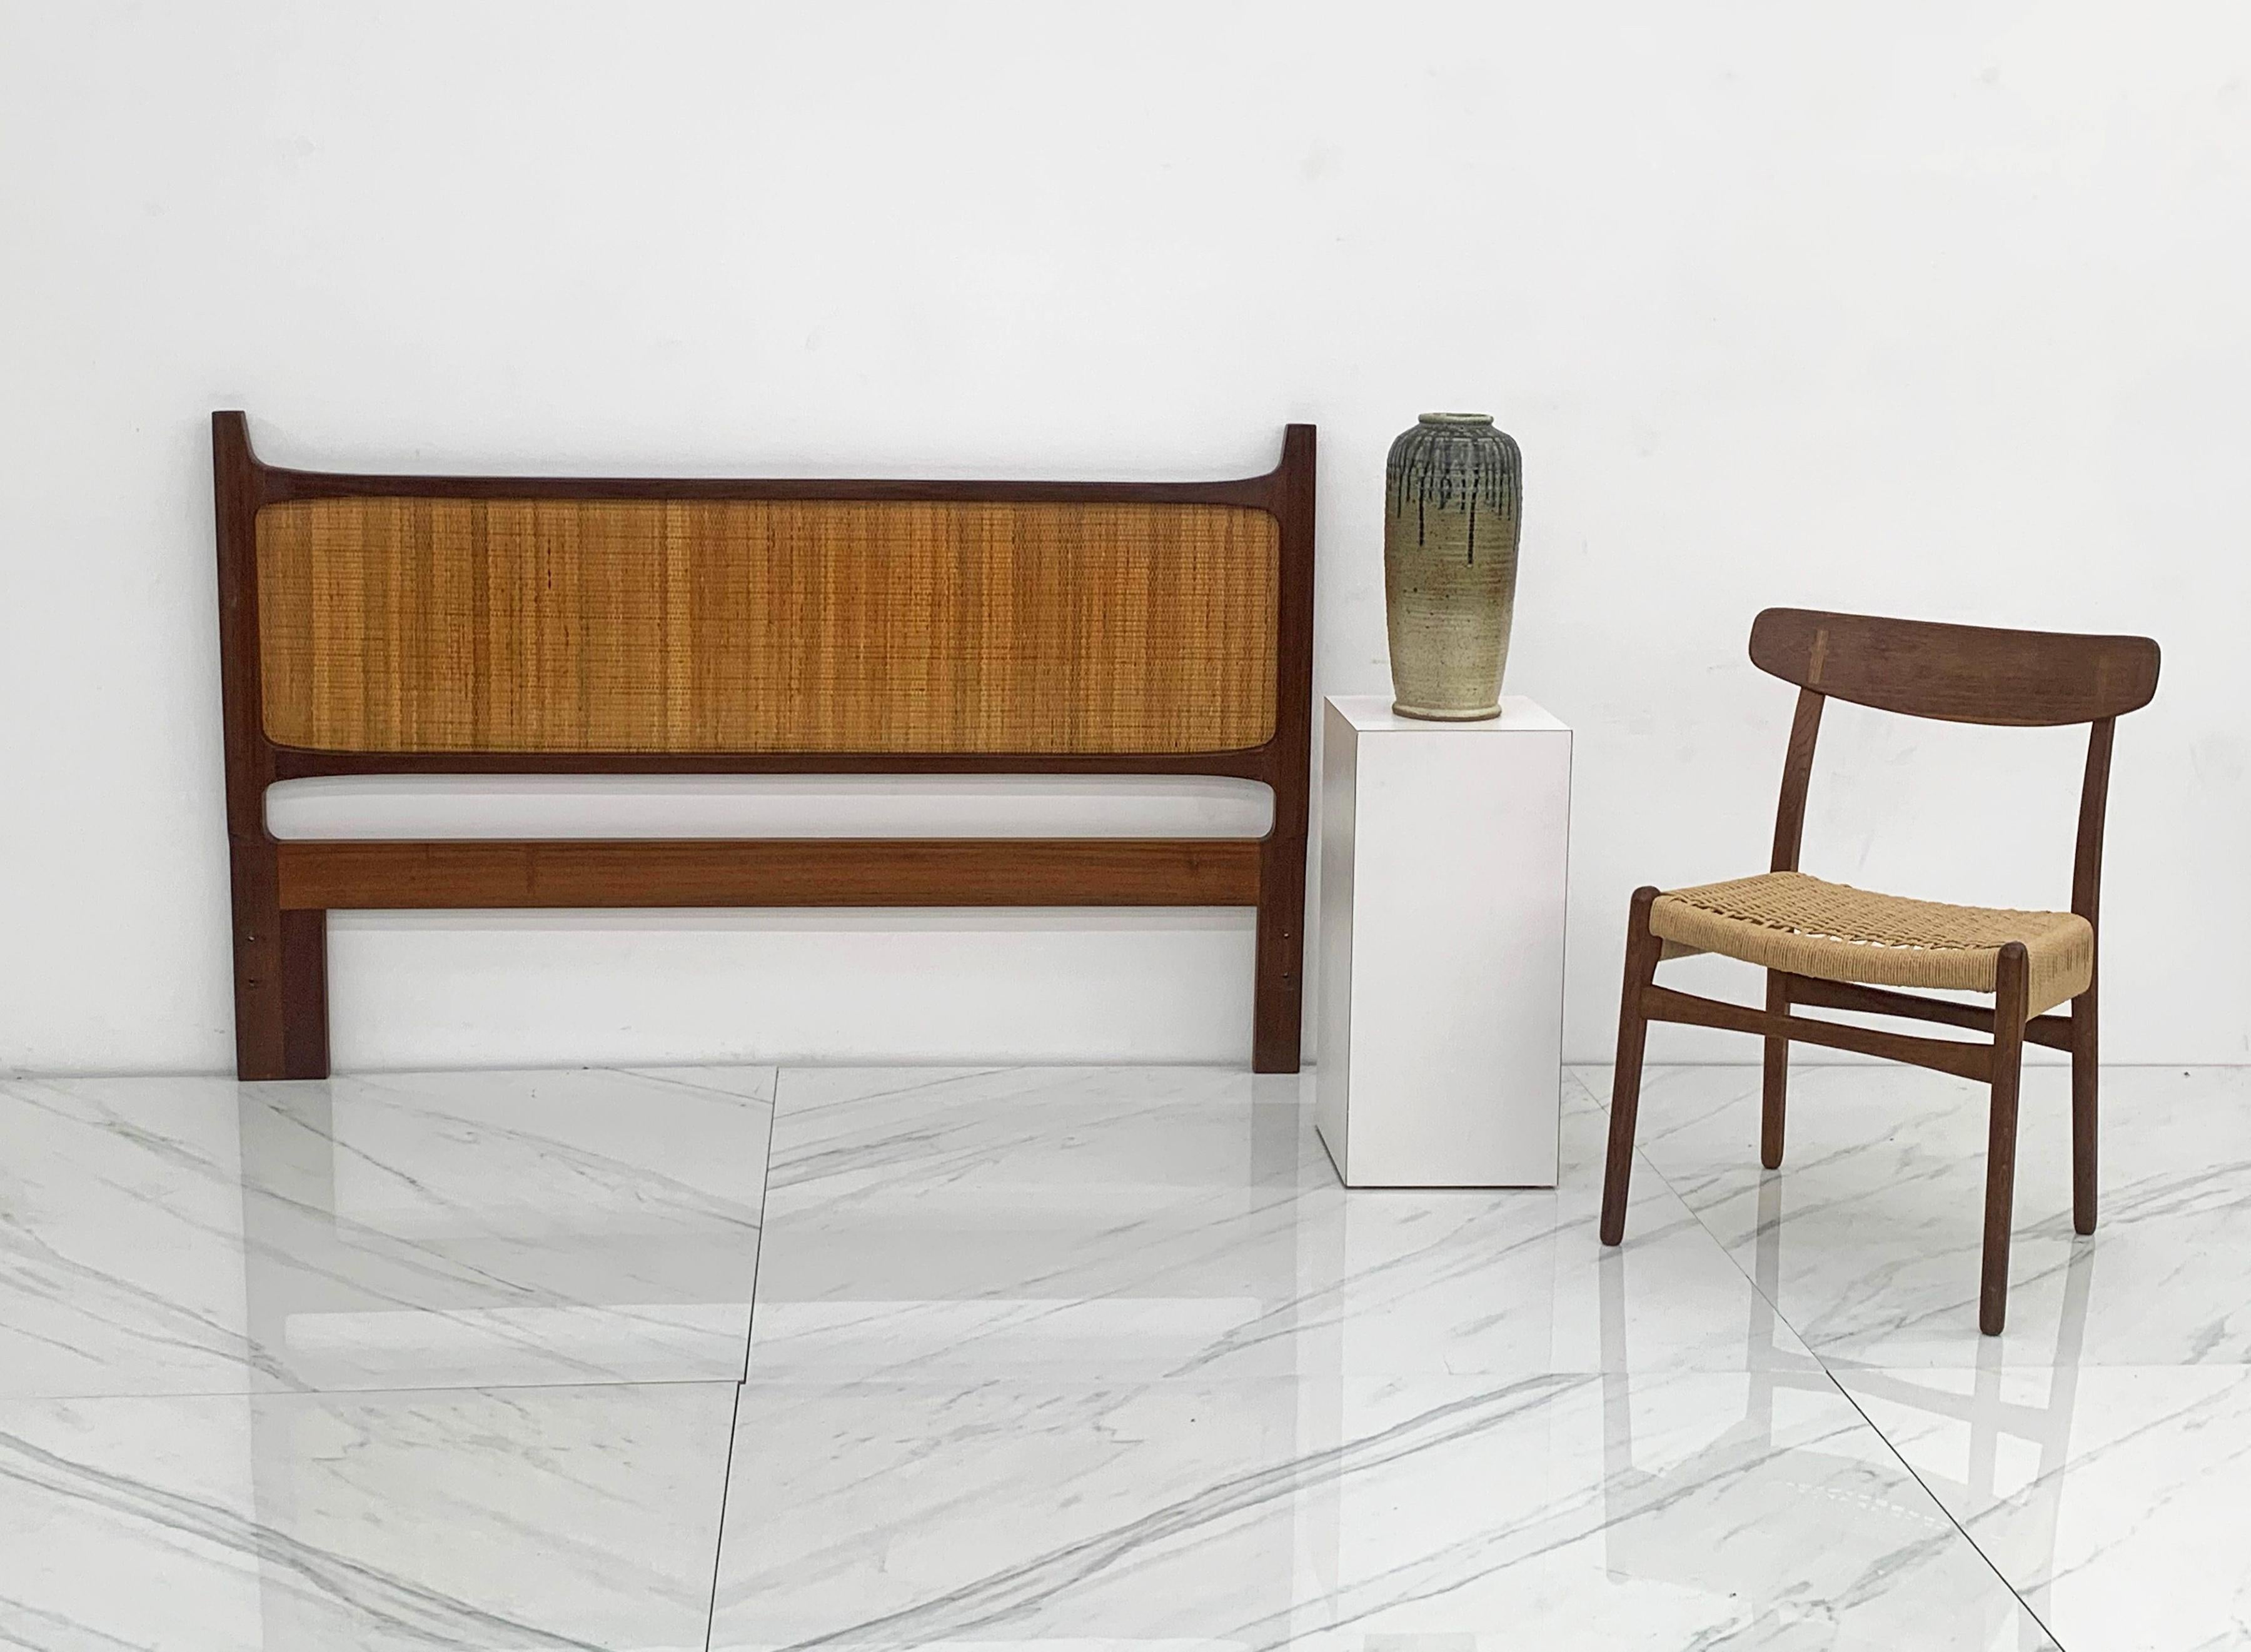 An exceptional and extremely rare 1950's Mid-Century Modern Queen sized heaboard designed by Jorgen Clausen for Brande Møbelfabrik, Denmark c. 1950. Often misattributed to Edmond Spence, this gorgeous headboard was fabricated from walnut with